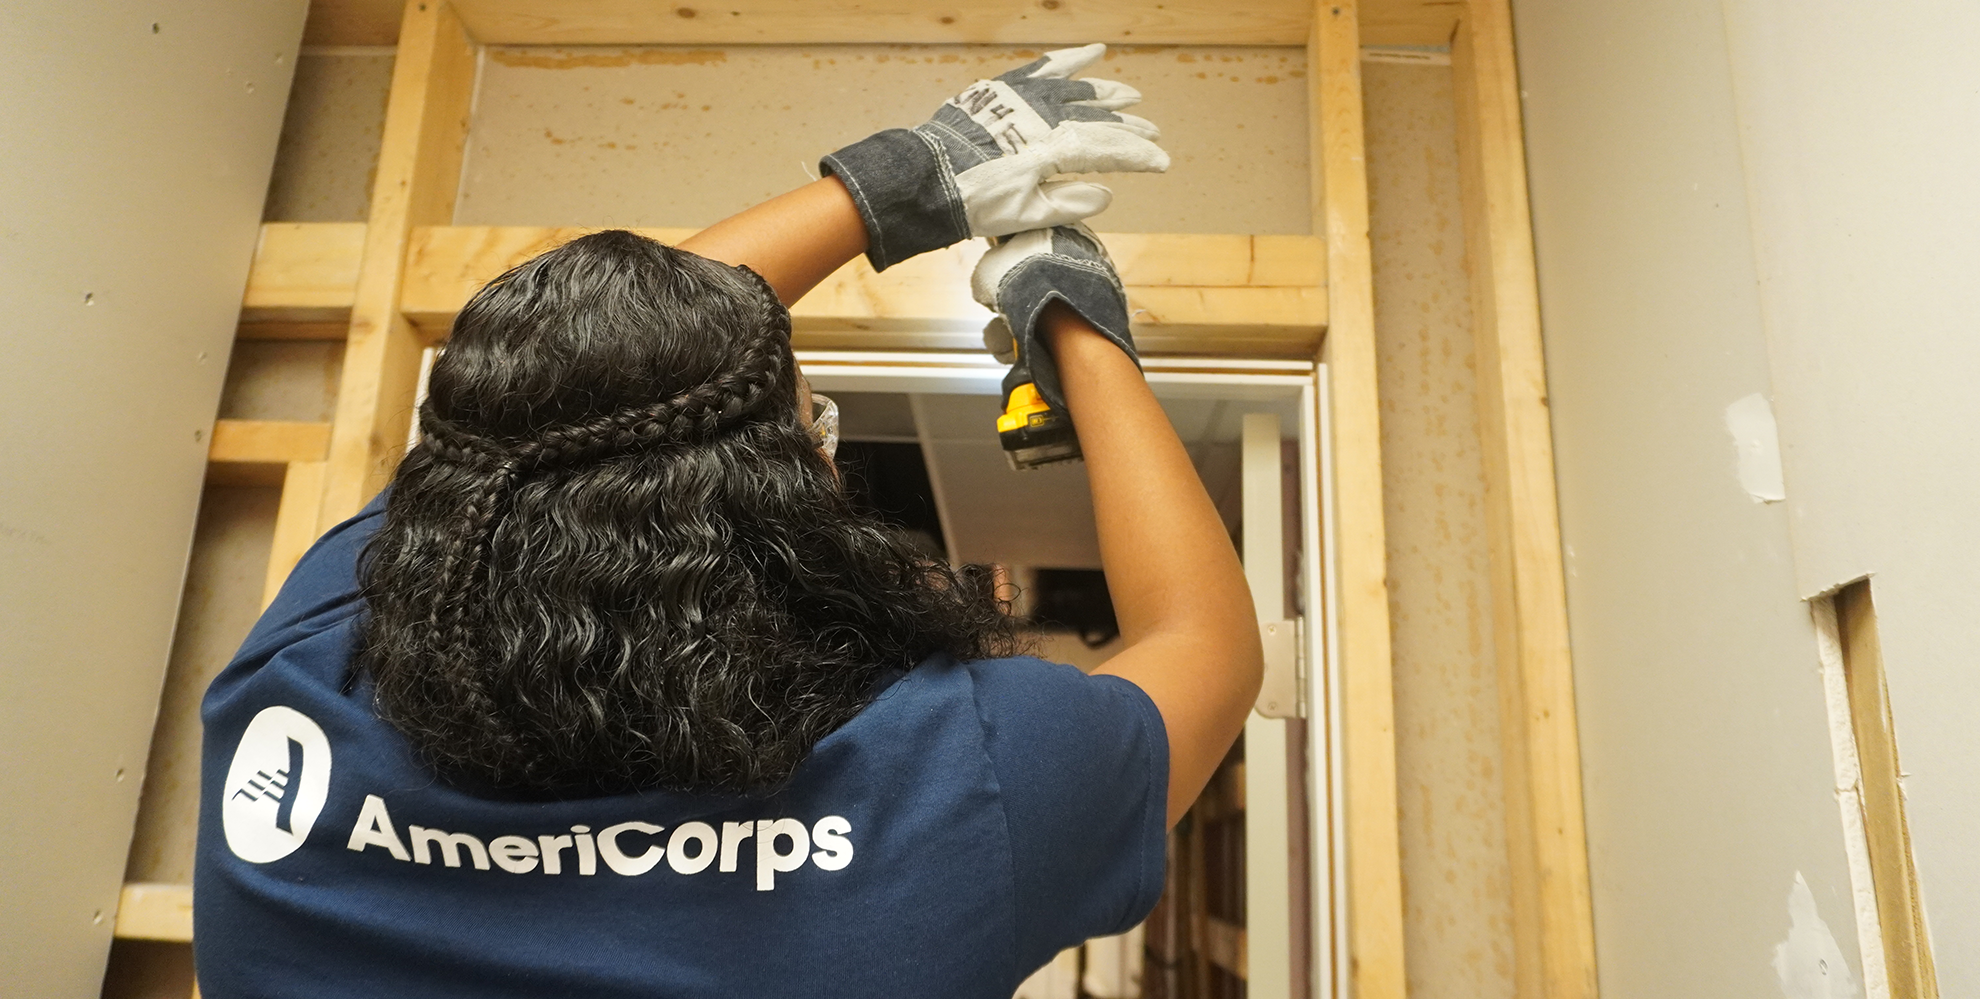 Woman wearing an AmeriCorps t-shirt drills into a wall.